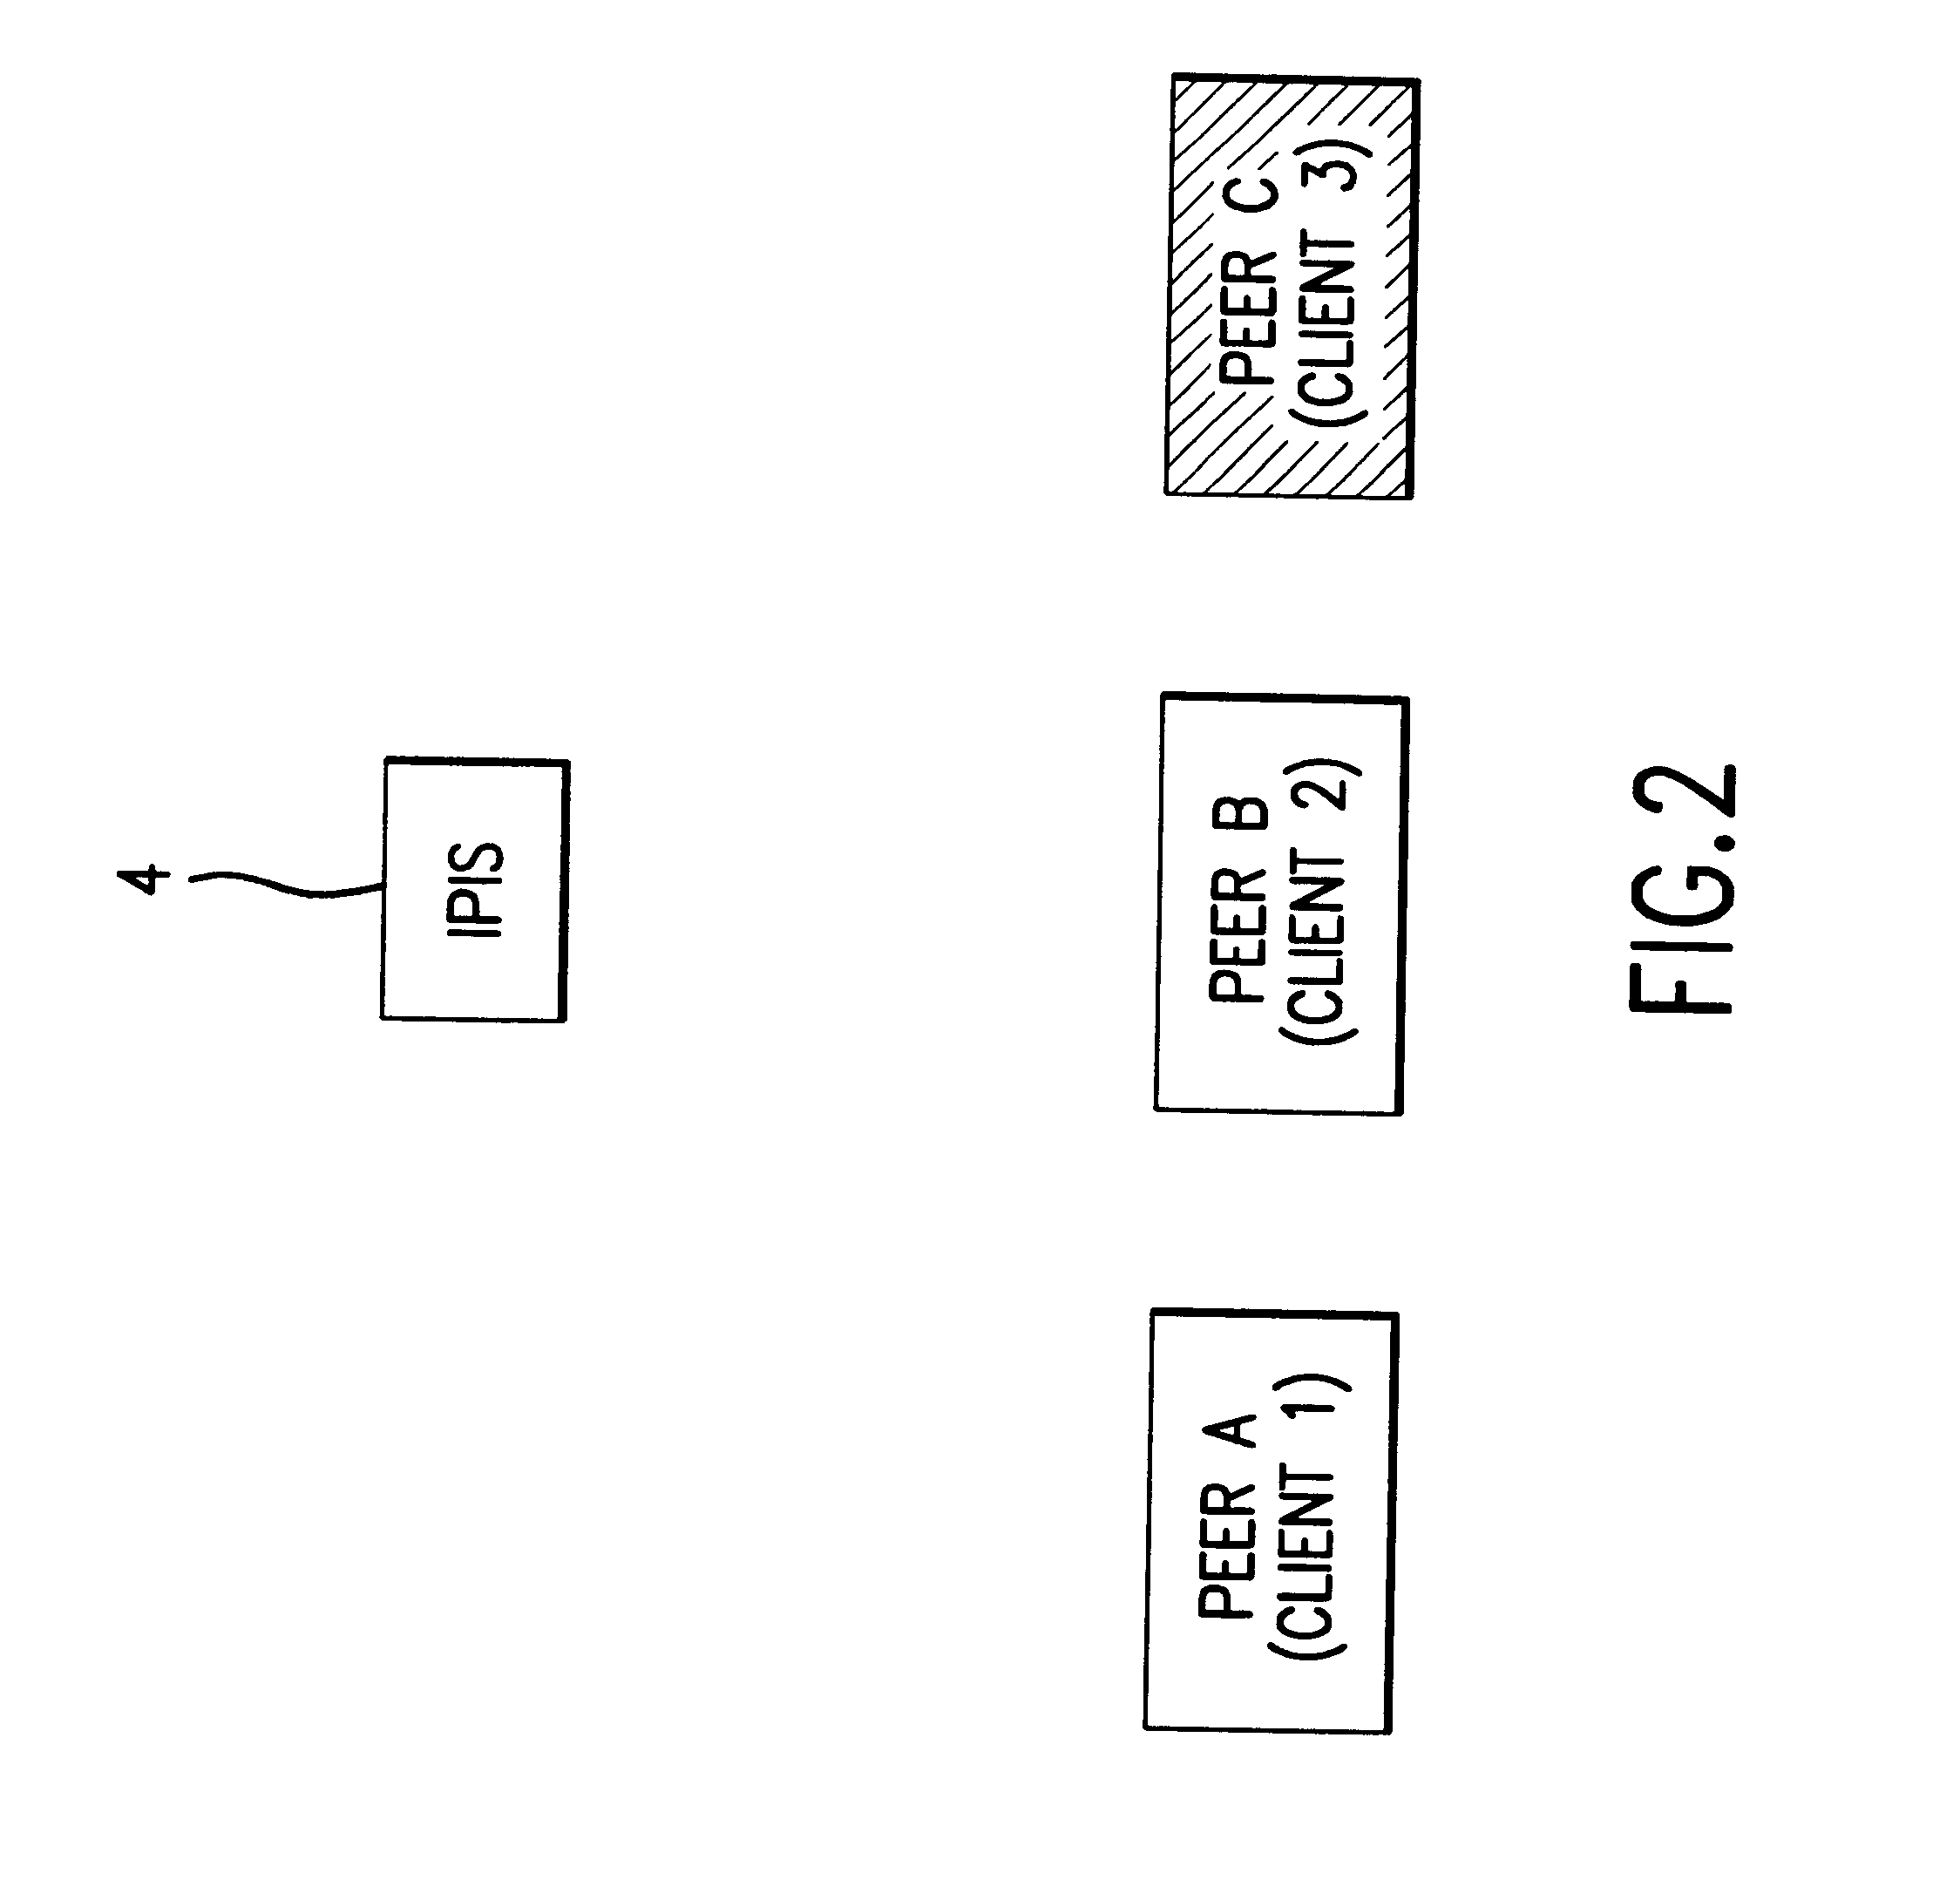 Method and system for validating and distributing network presence information for peers of interest